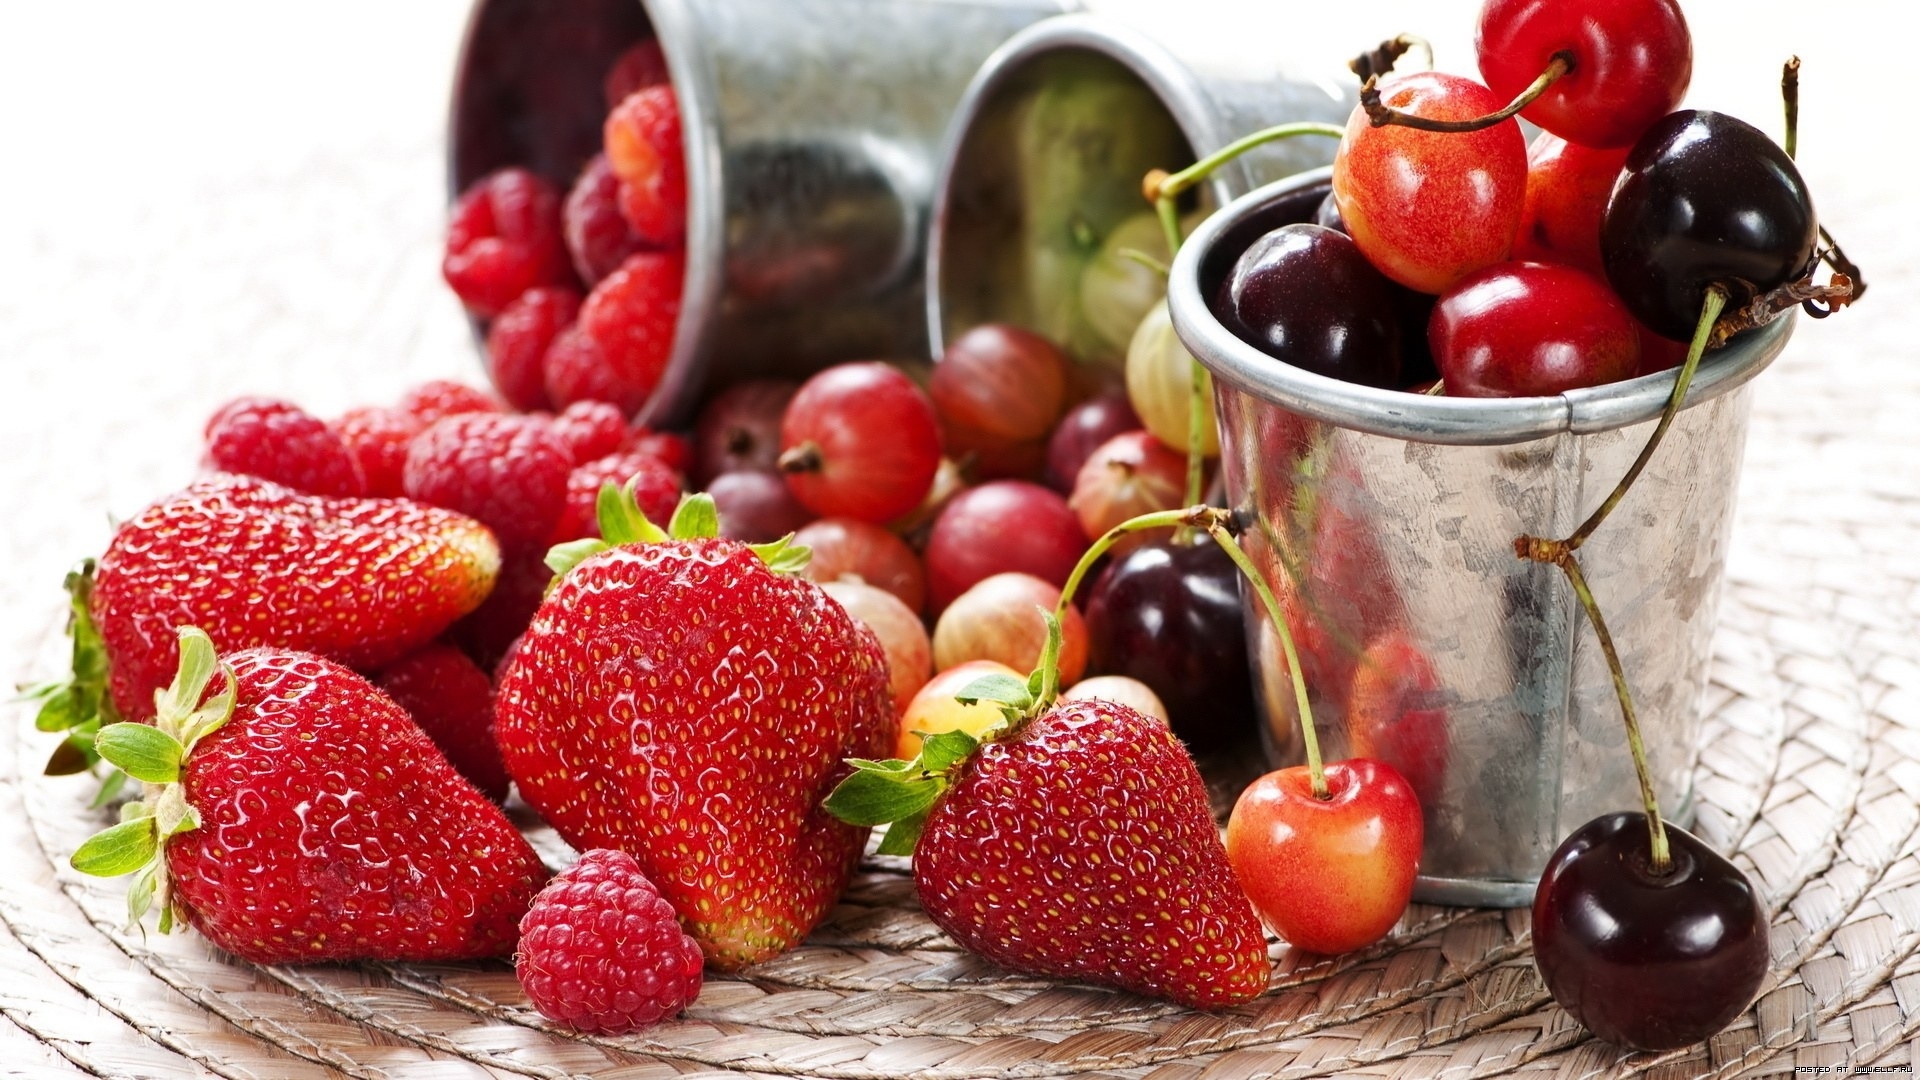 fruits, sweet cherry, food, strawberry, red images